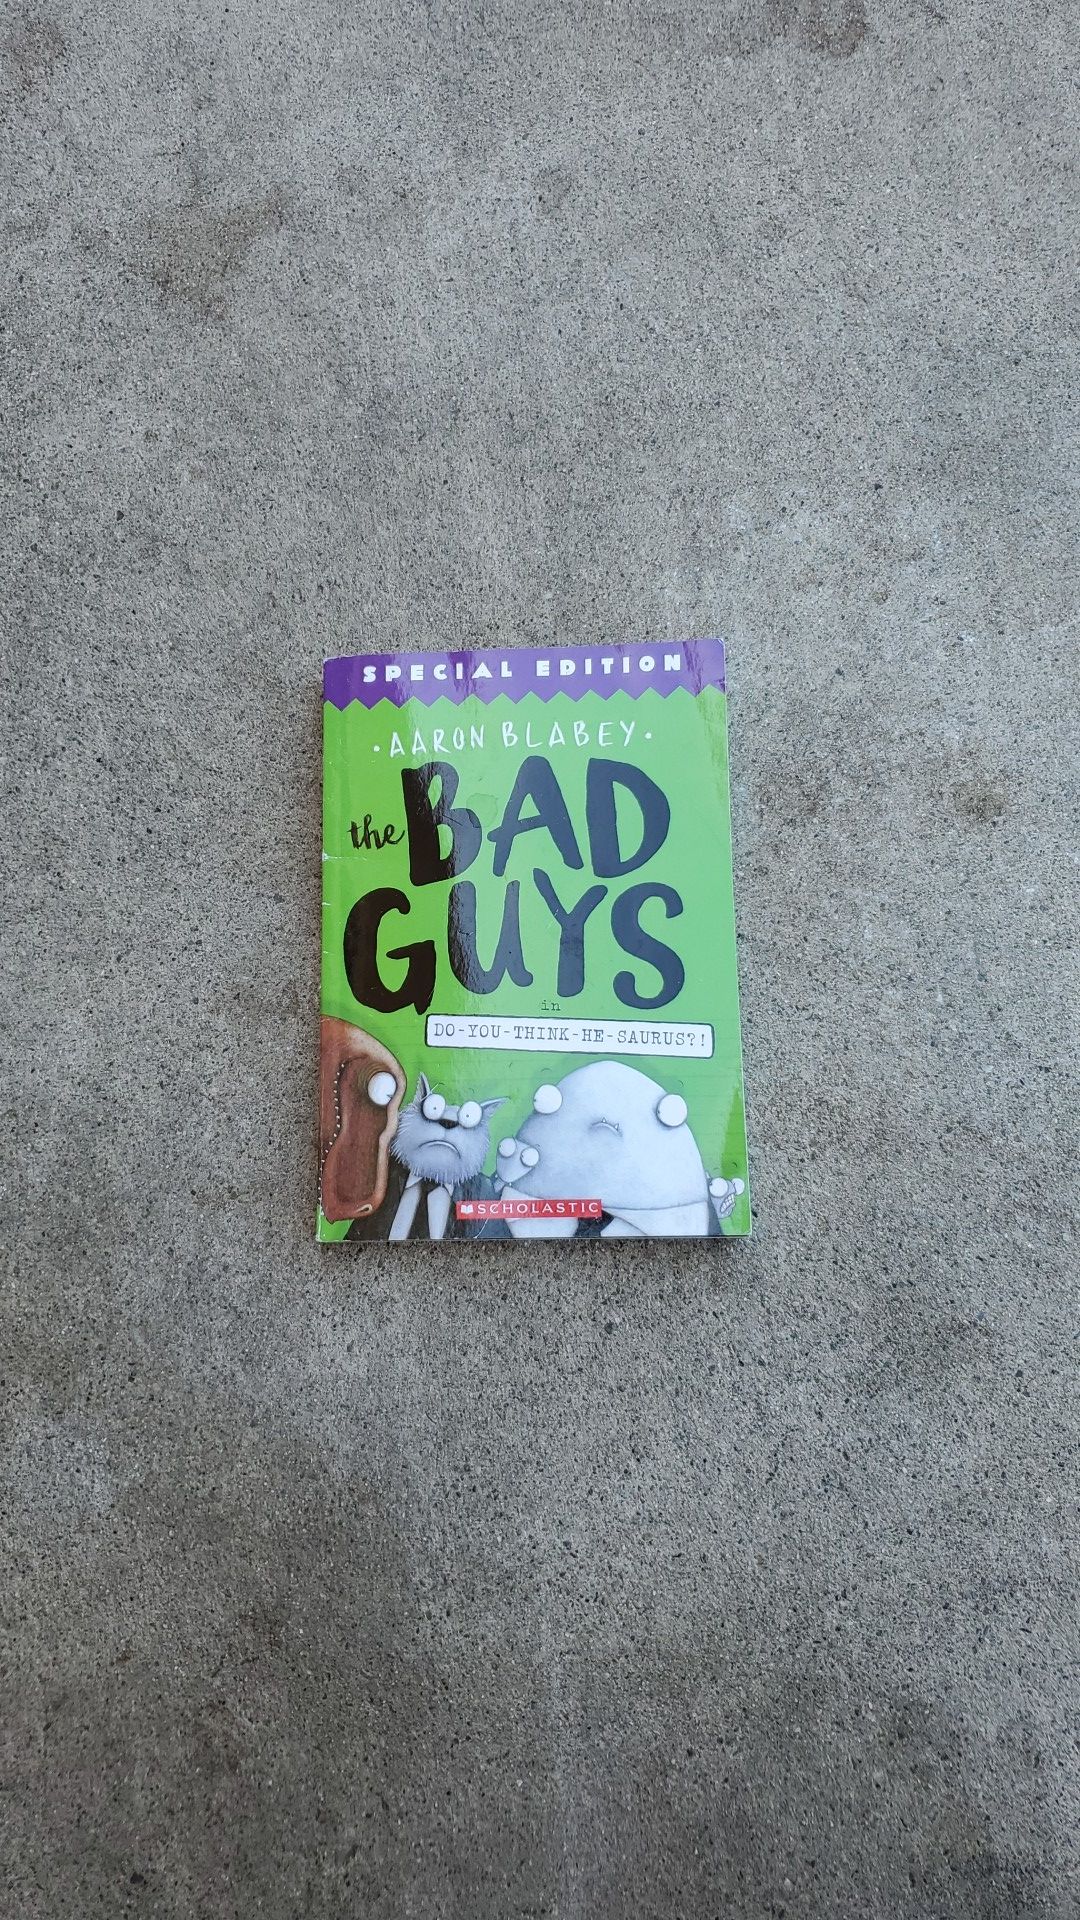 The bad guys book